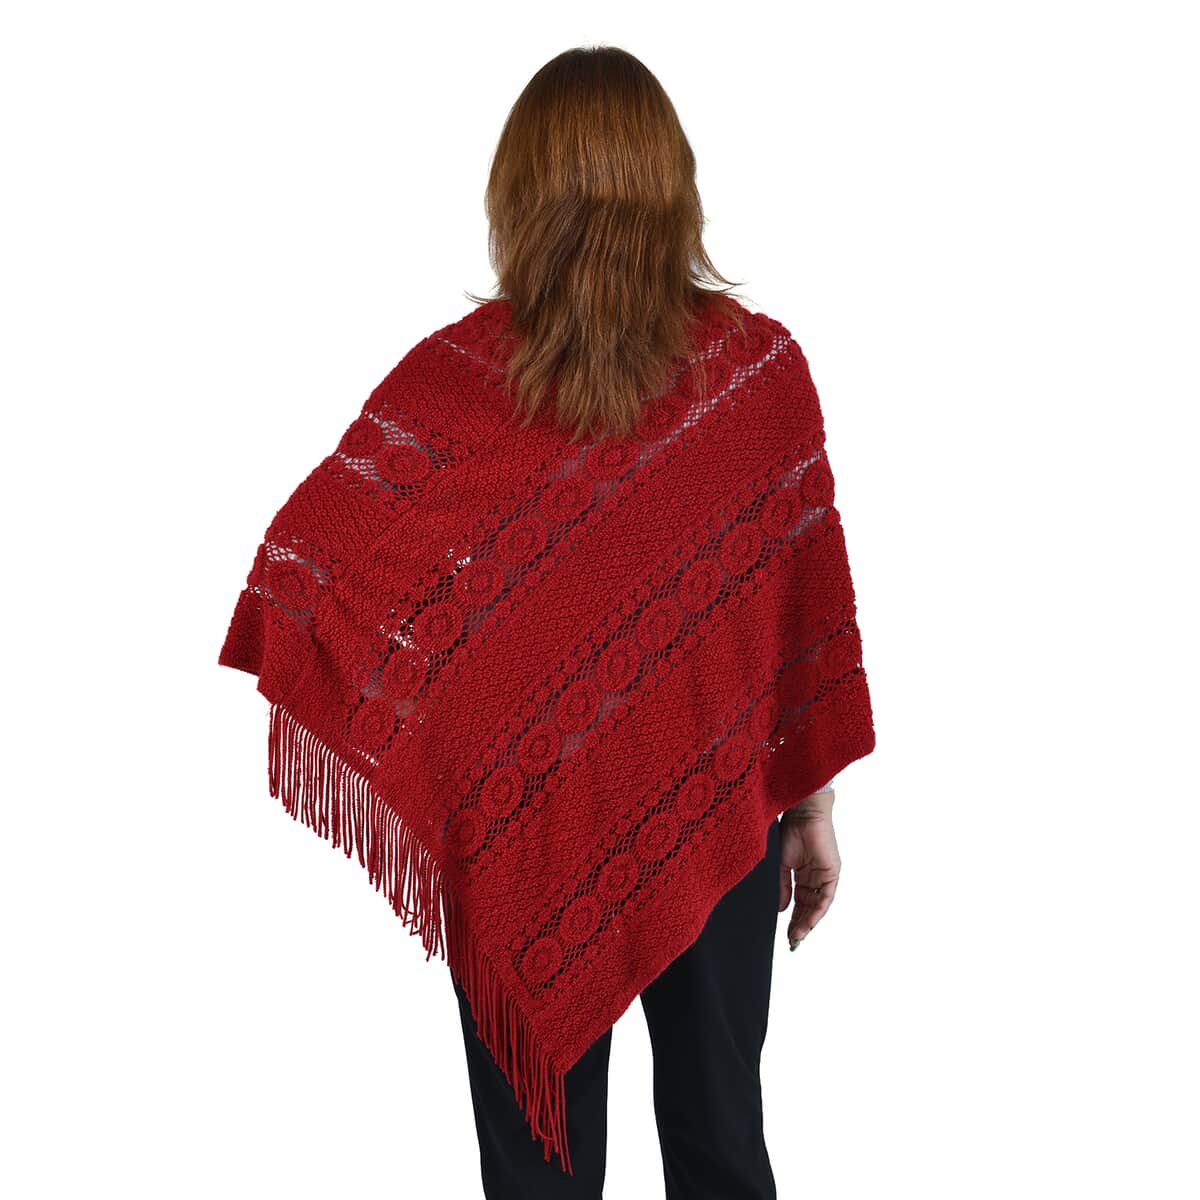 Red Diamond-Shaped Knitted Poncho with Beads (One Size Fits Most) image number 2